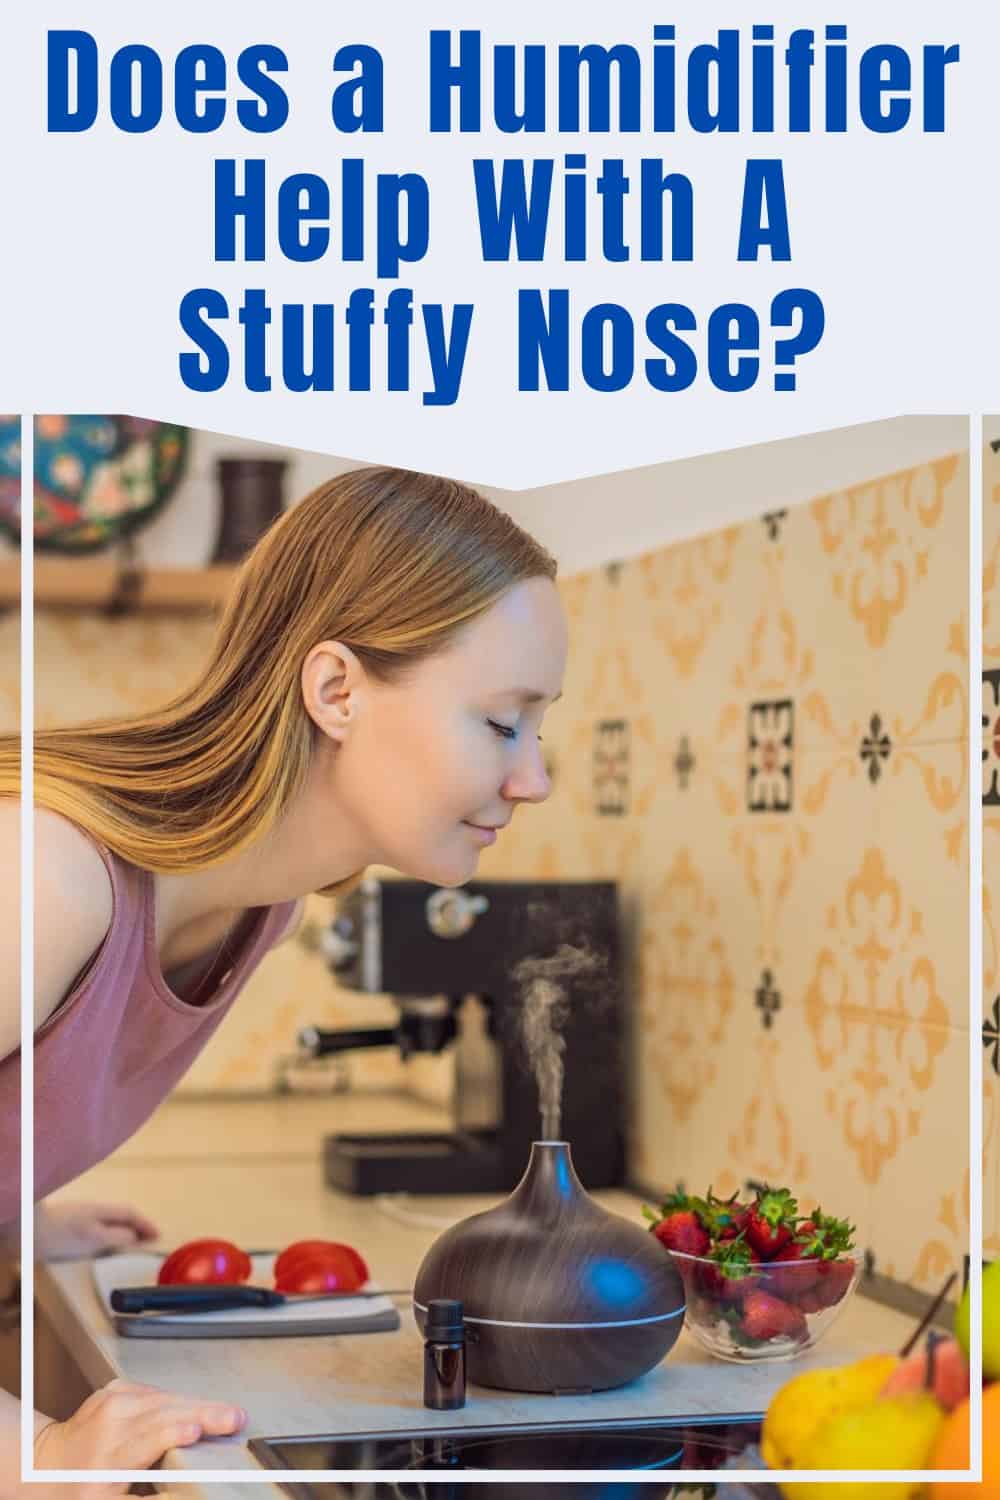 Yes a humidifier can help with a stuffy nose